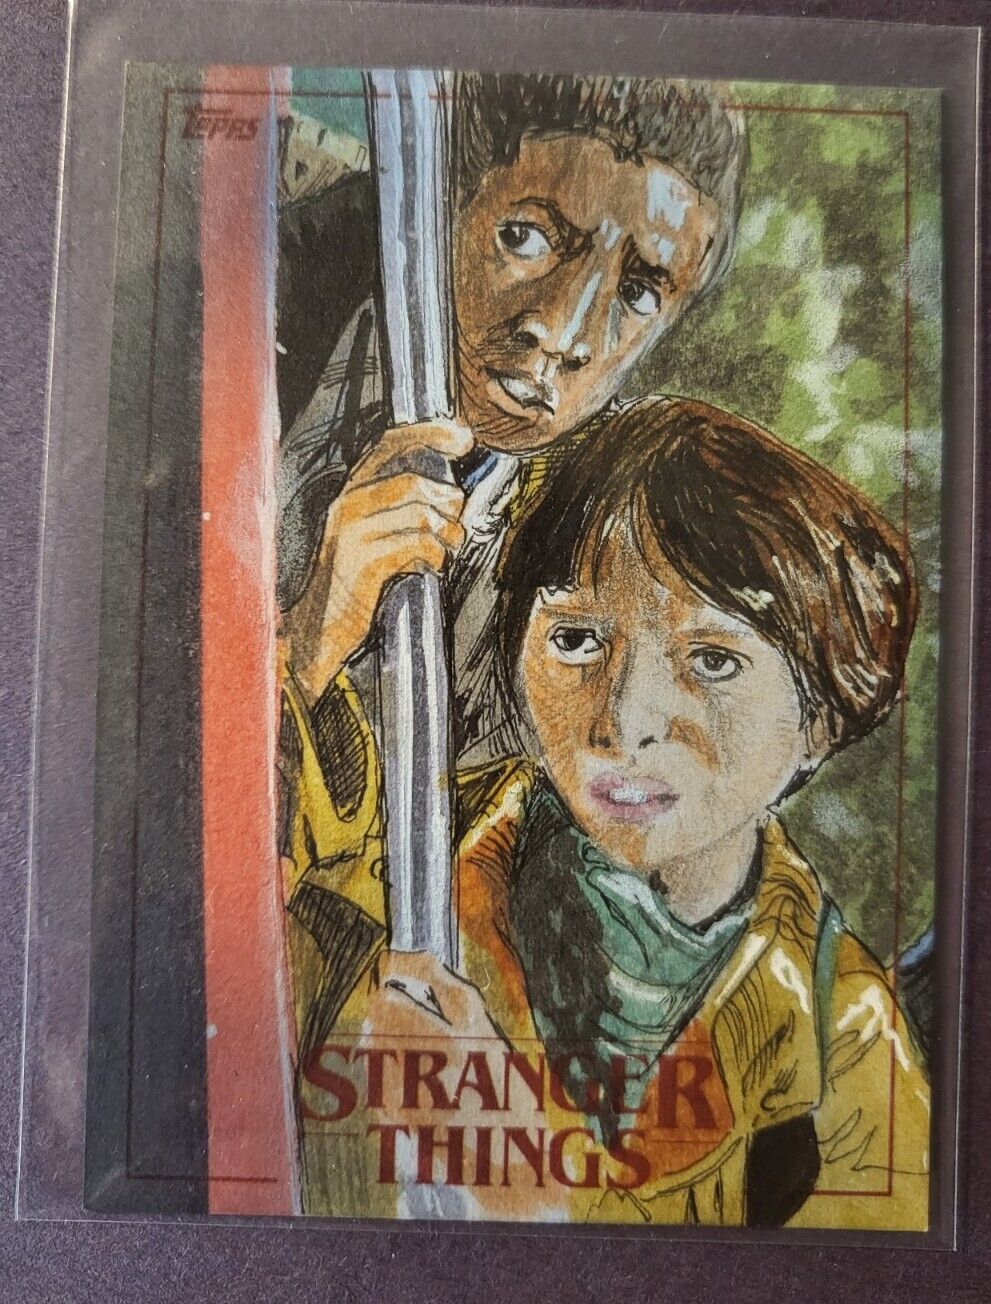 Topps Stranger Things S1 Sketch Card by Kiley Beecher Auto 1/1